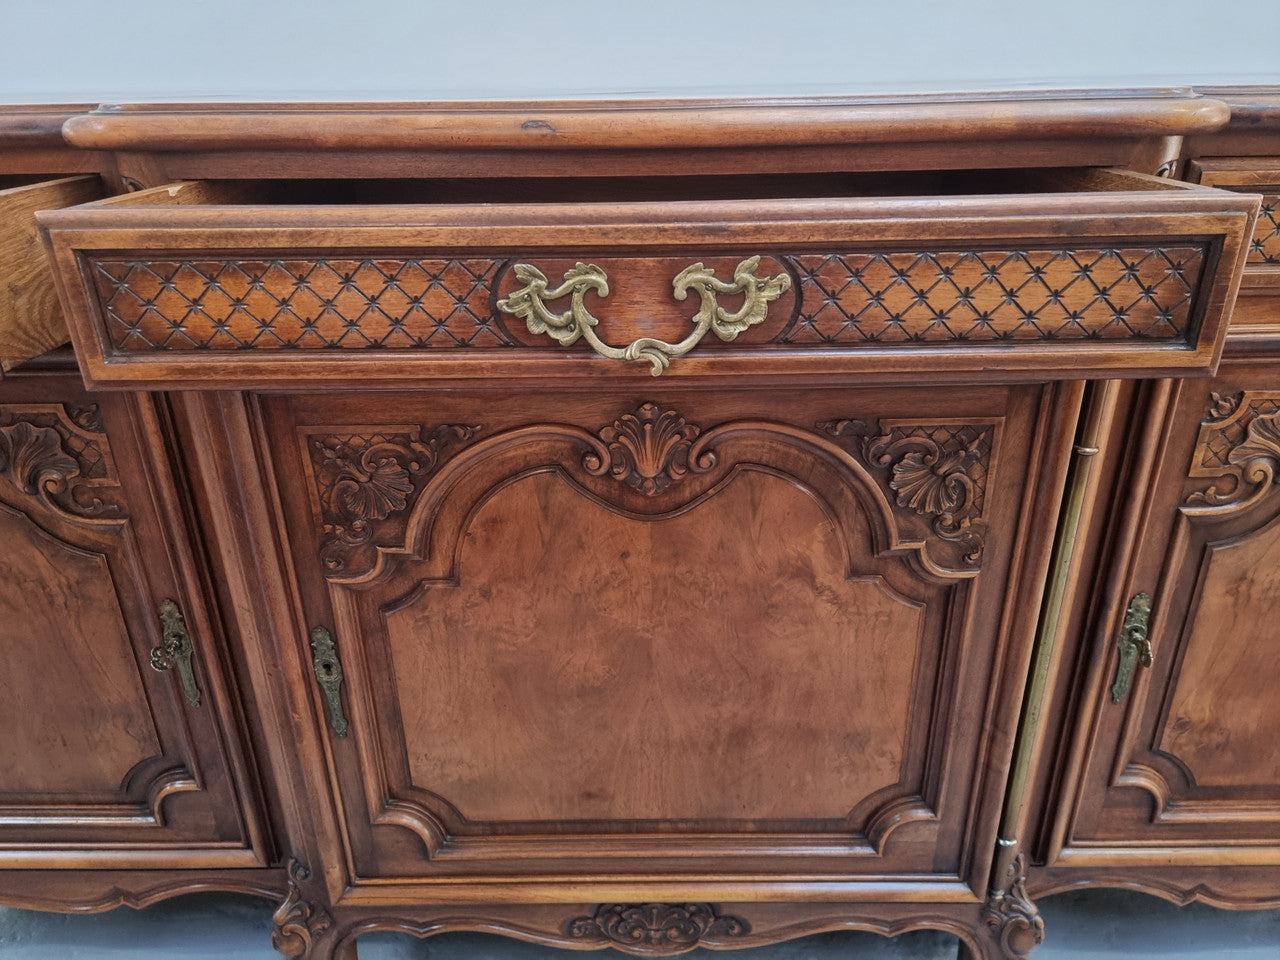 French Burr Walnut/Walnut parquetry top three door and three drawer sideboard. Plenty of storage space and beautiful decorative carvings. In good original detailed condition.